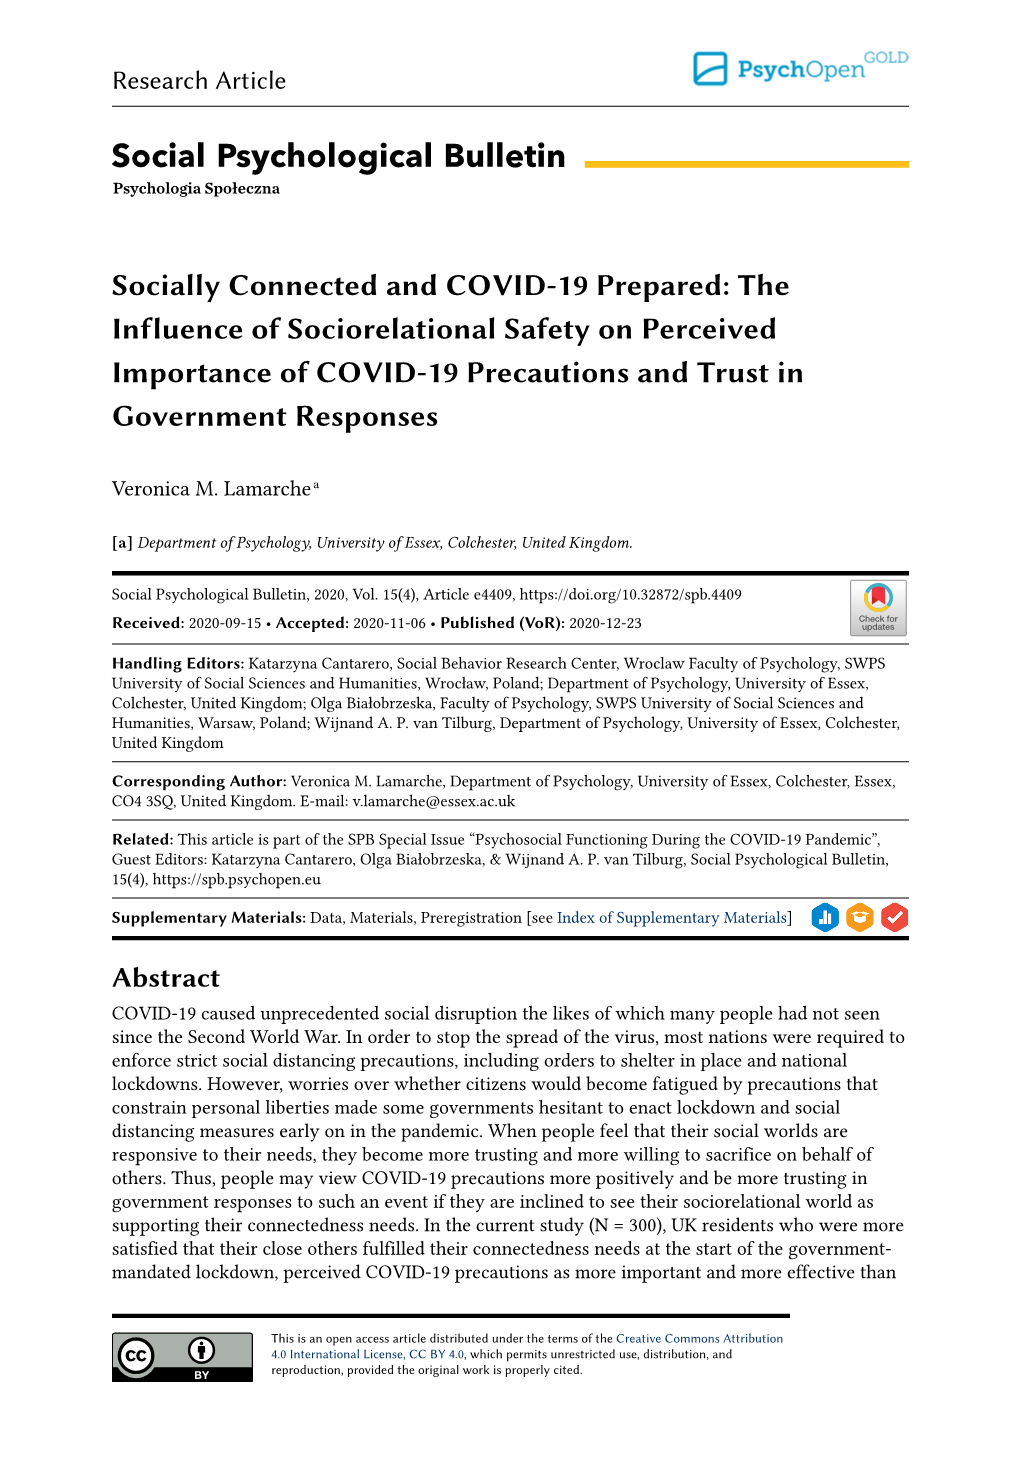 The Influence of Sociorelational Safety on Perceived Importance of COVID-19 Precautions and Trust in Government Responses